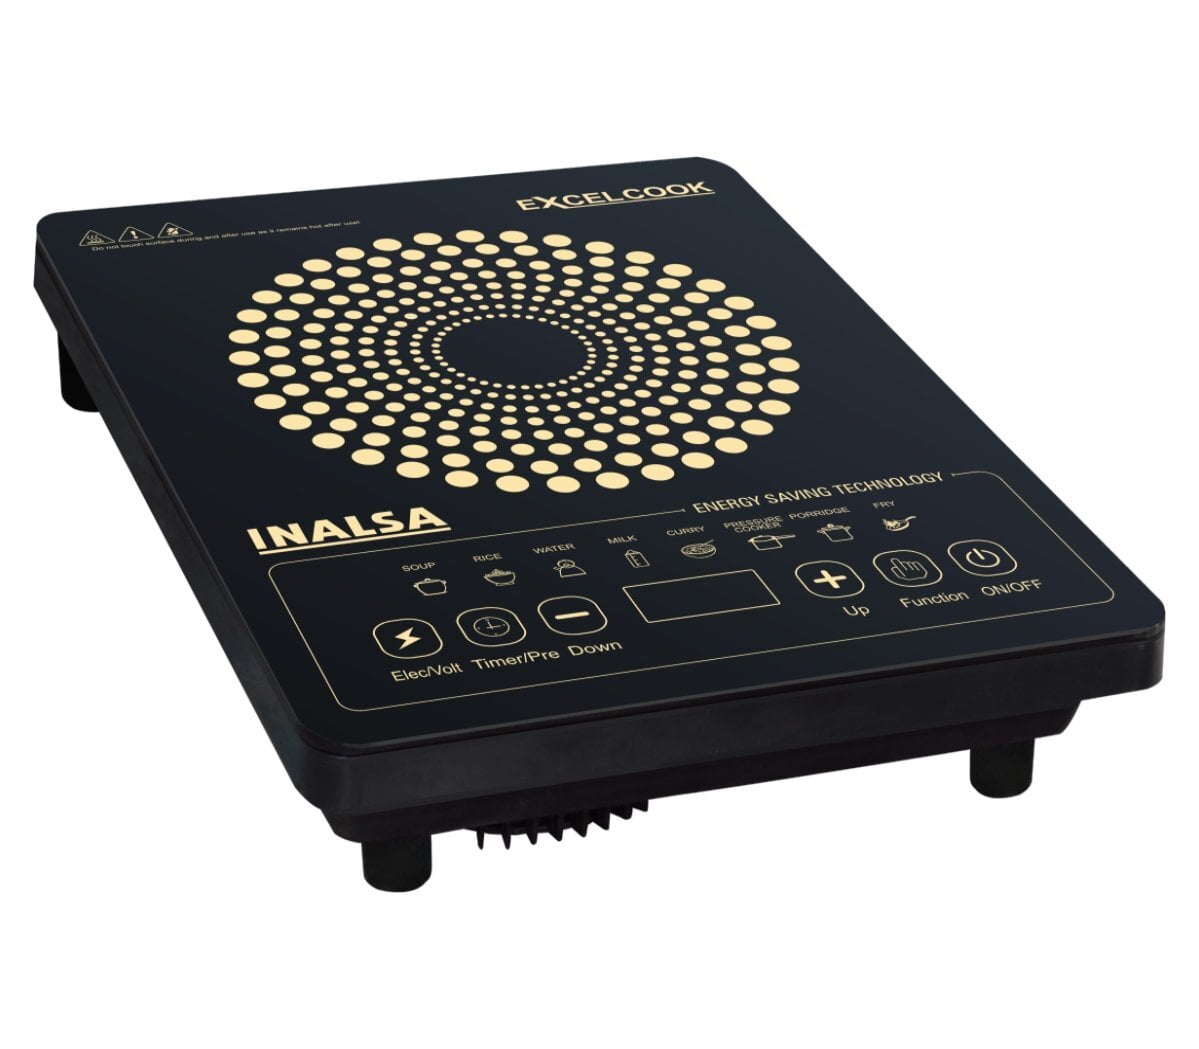 Inalsa Excel Induction Cooktop On Dillimall.Com